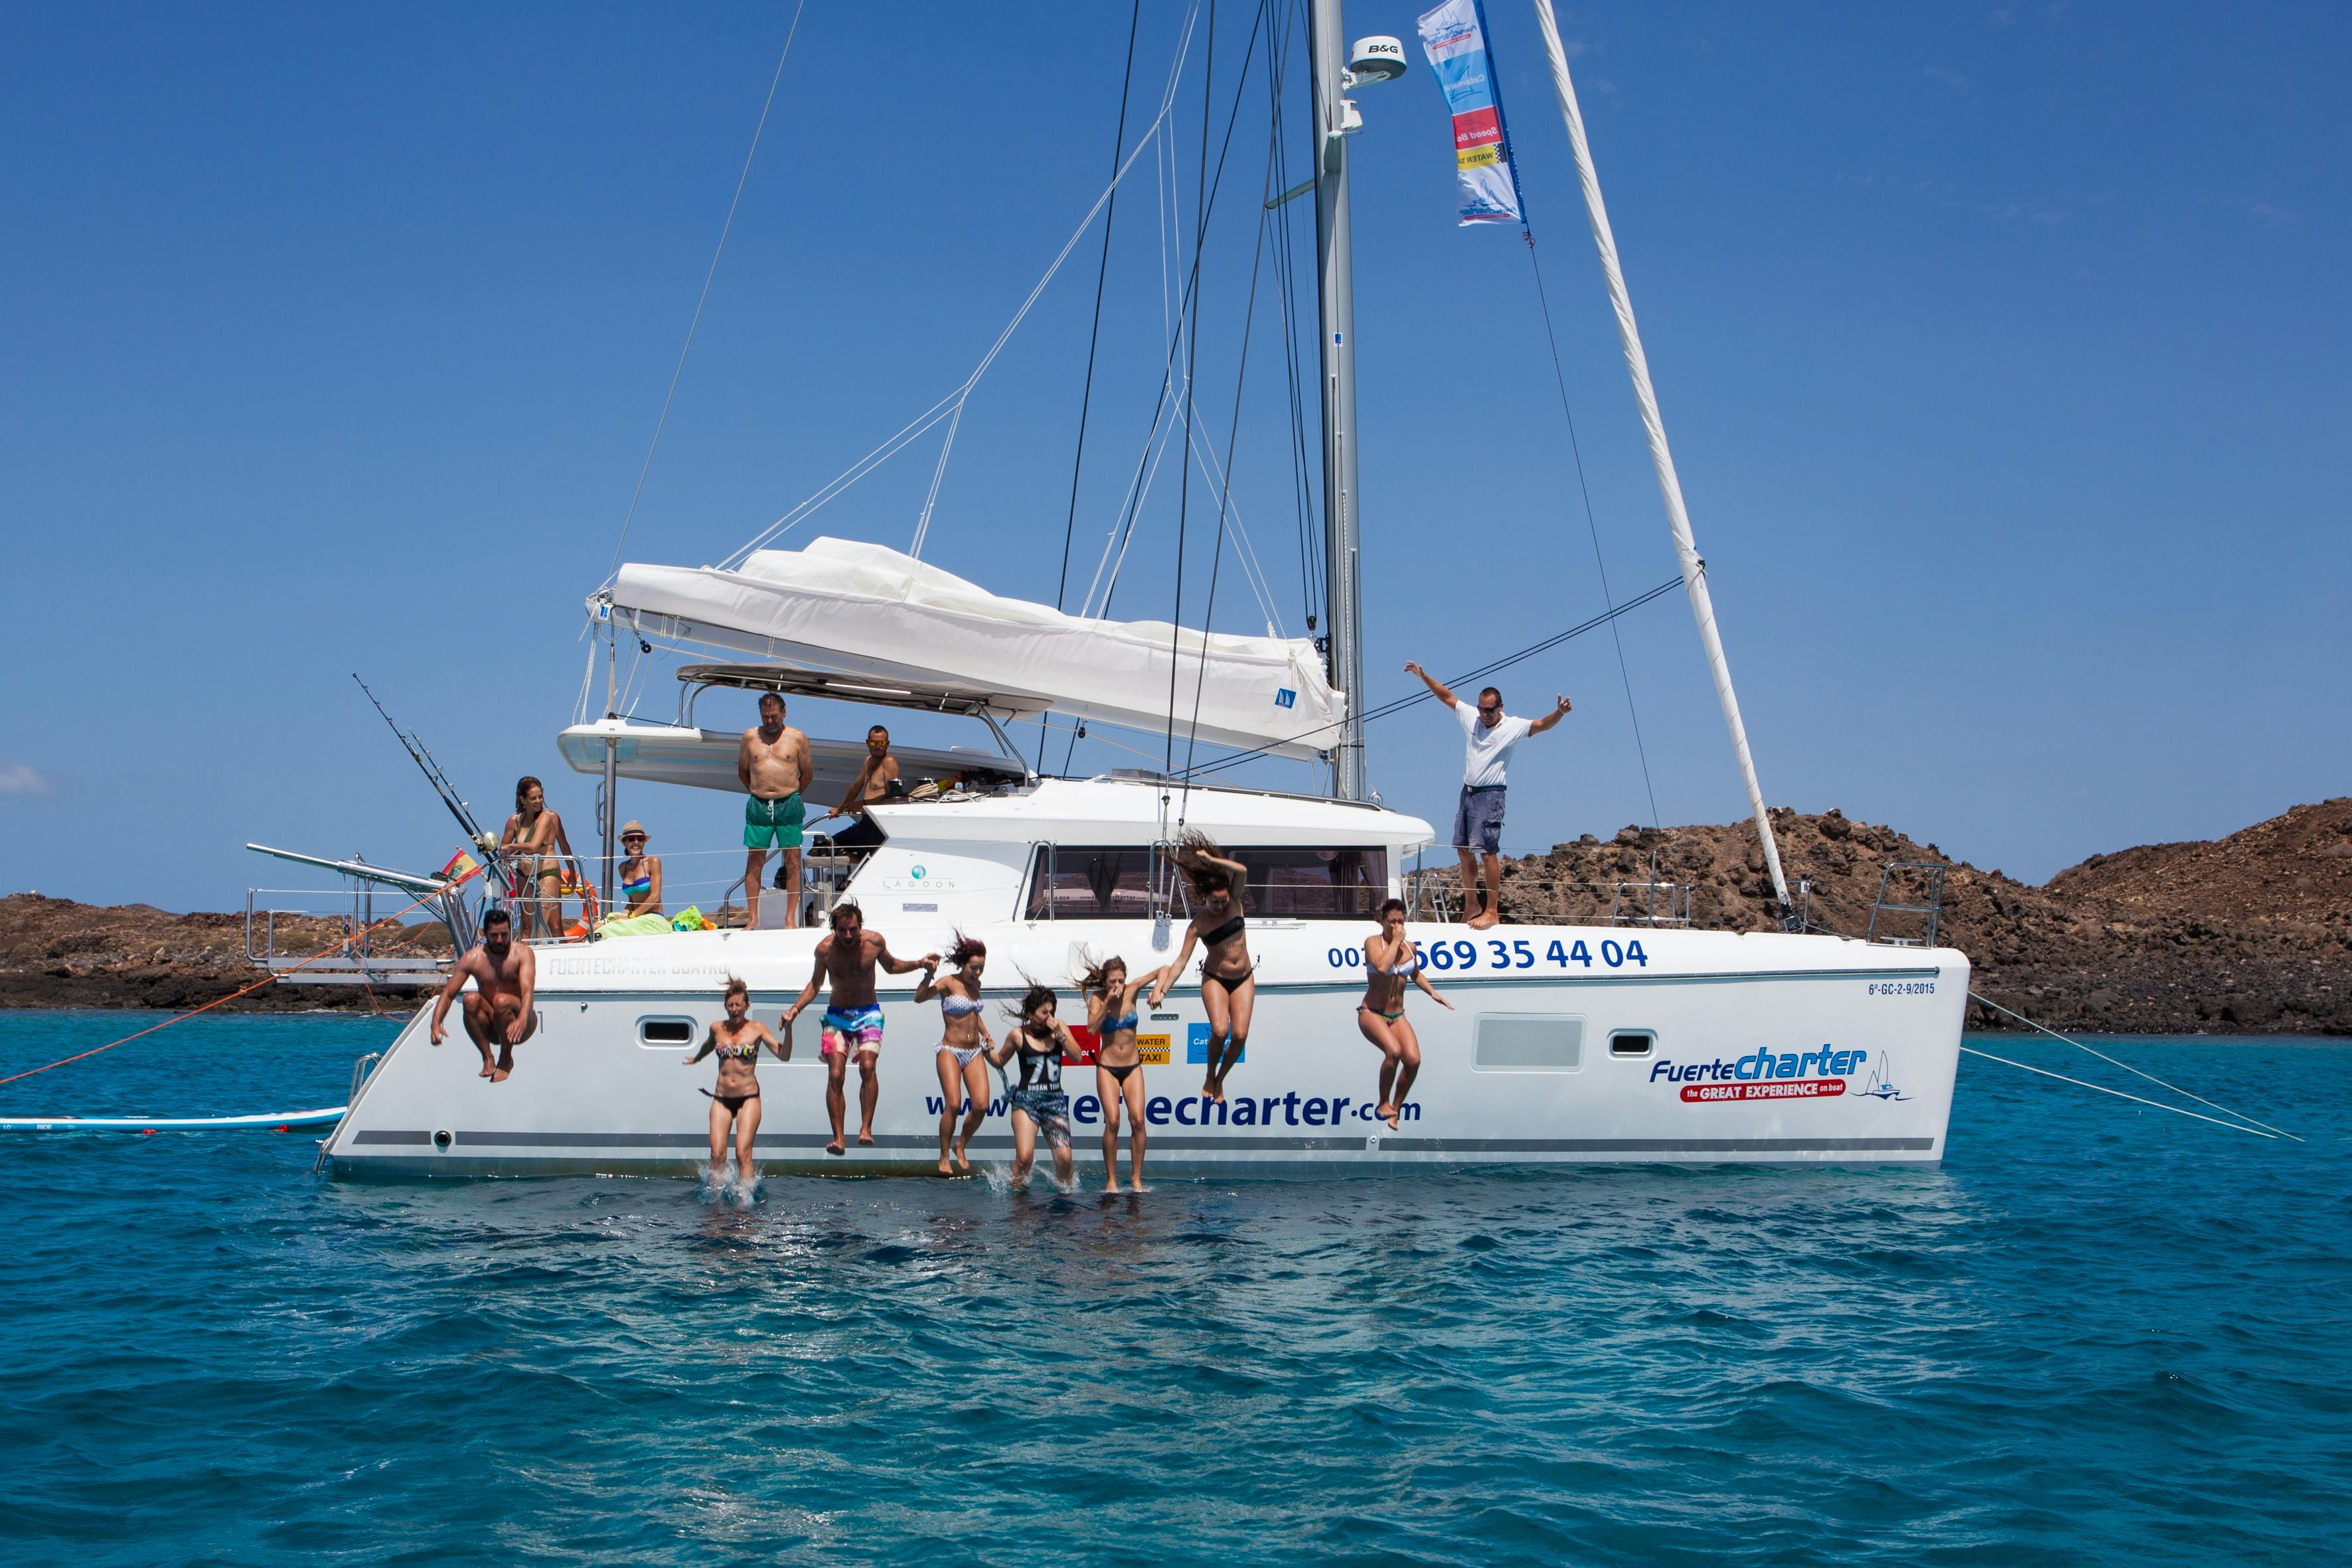 Catamaran cruise to Lobos Island with guided tour and paella Musement